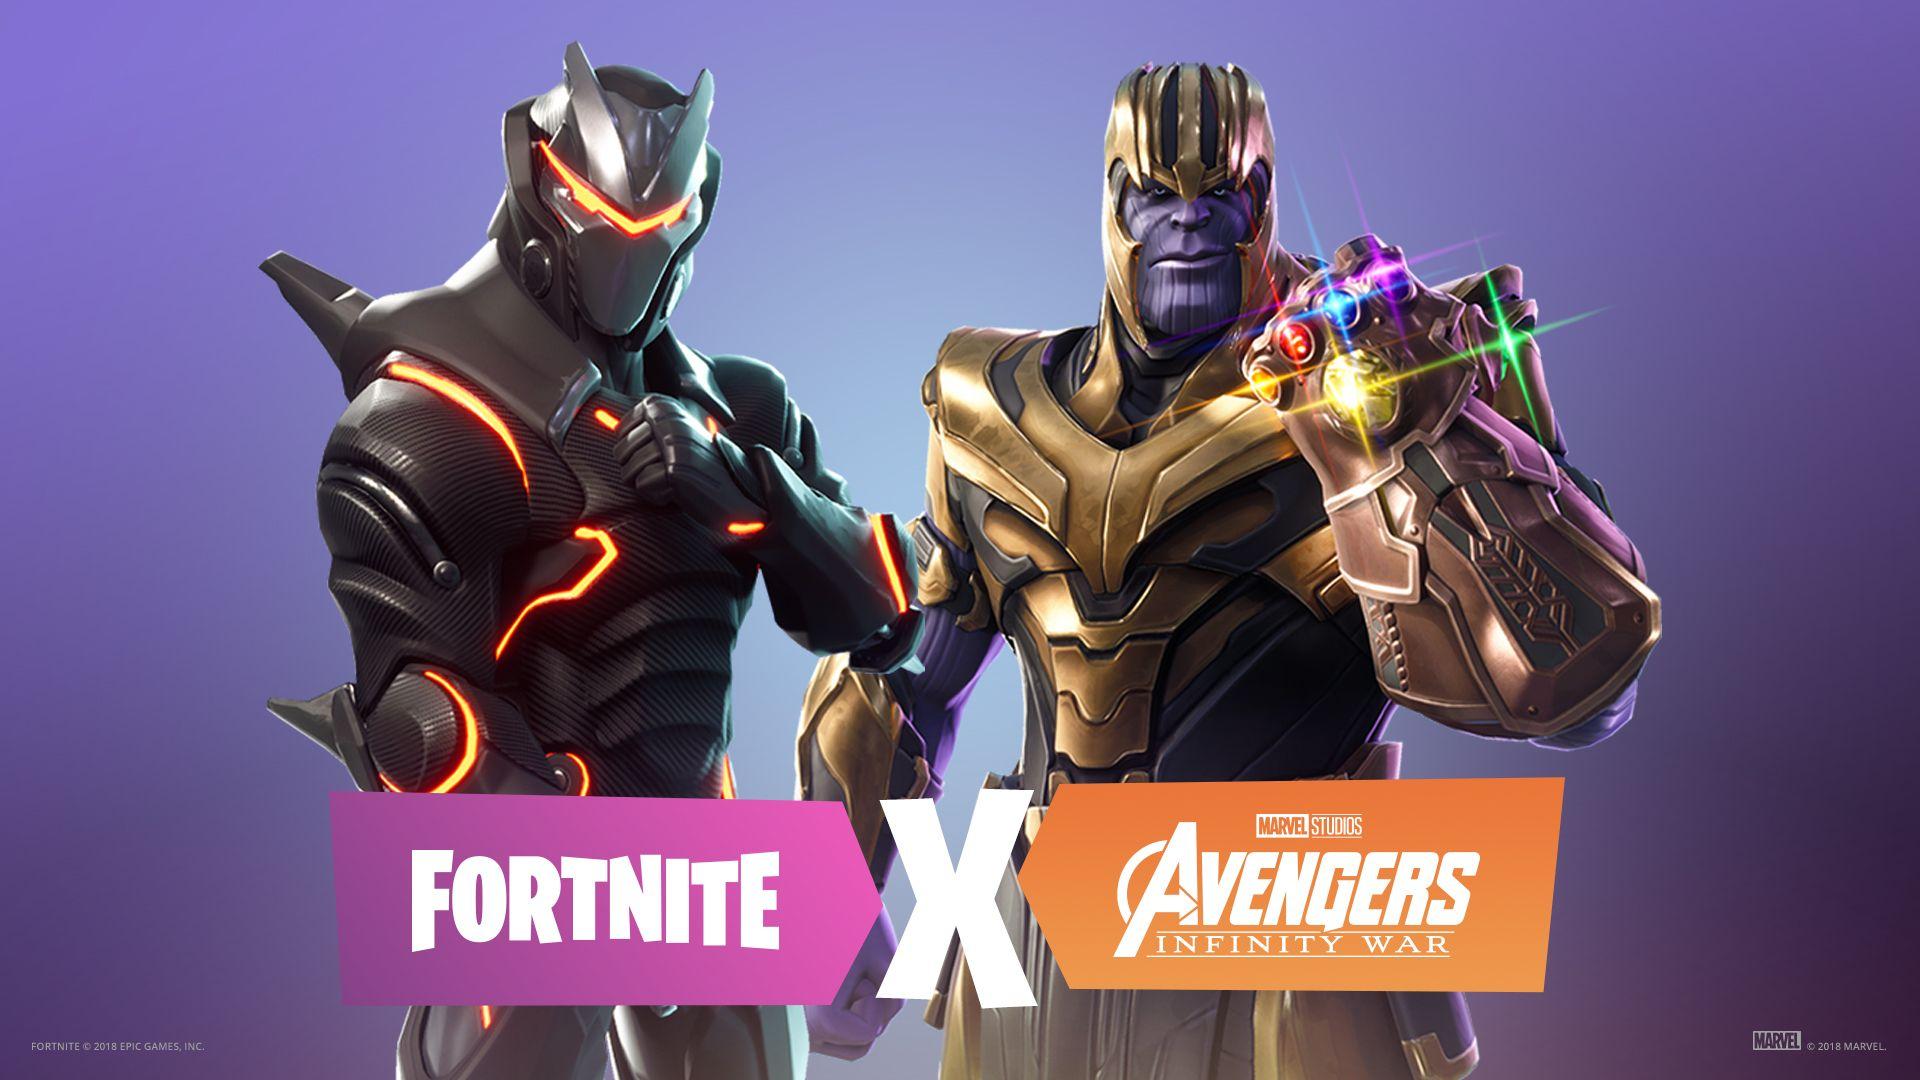 Thanos gets less health and more power in Fortnite's latest patch